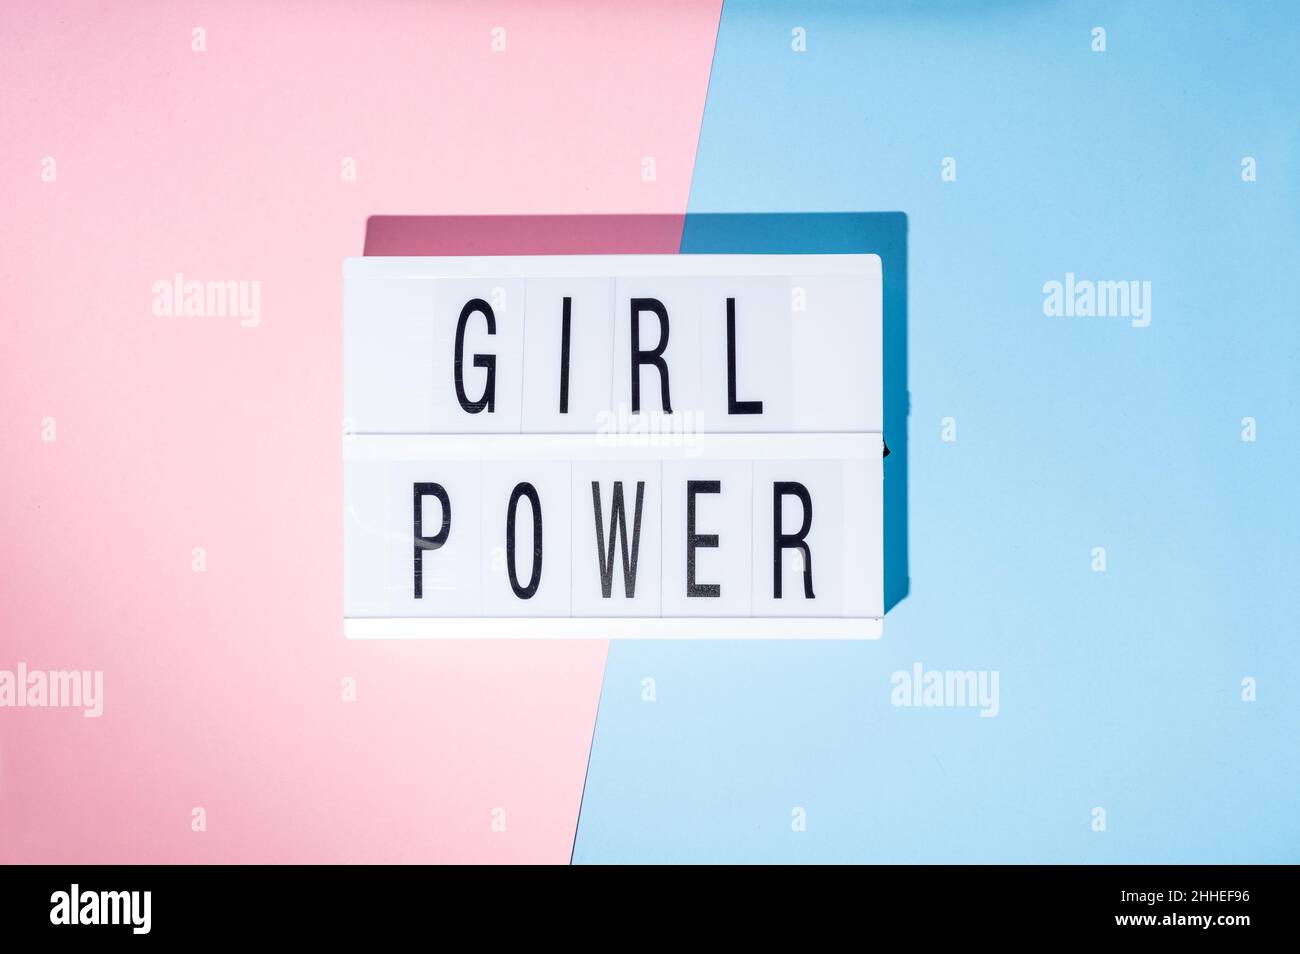 Girl power text on the lightbox. Top view of a concept of feminism with a pink and blue background Stock Photo